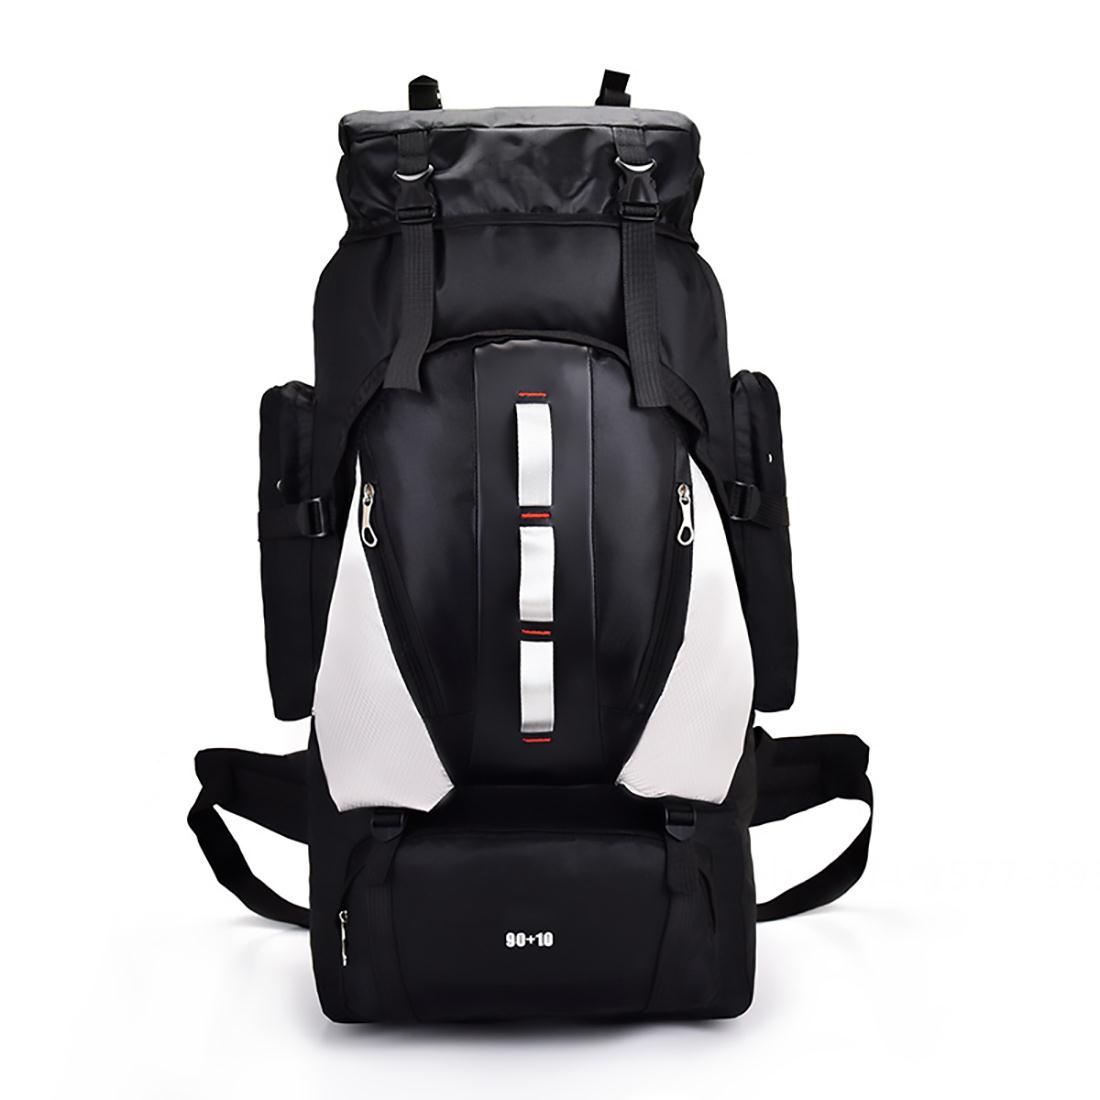 Backpack - 90L Hiking Backpack Waterproof Internal Frame Backpack Large Hiking Mountaineering Backpack, Free Rain Cover for Men and Women Outdoors.Black - image 1 of 9